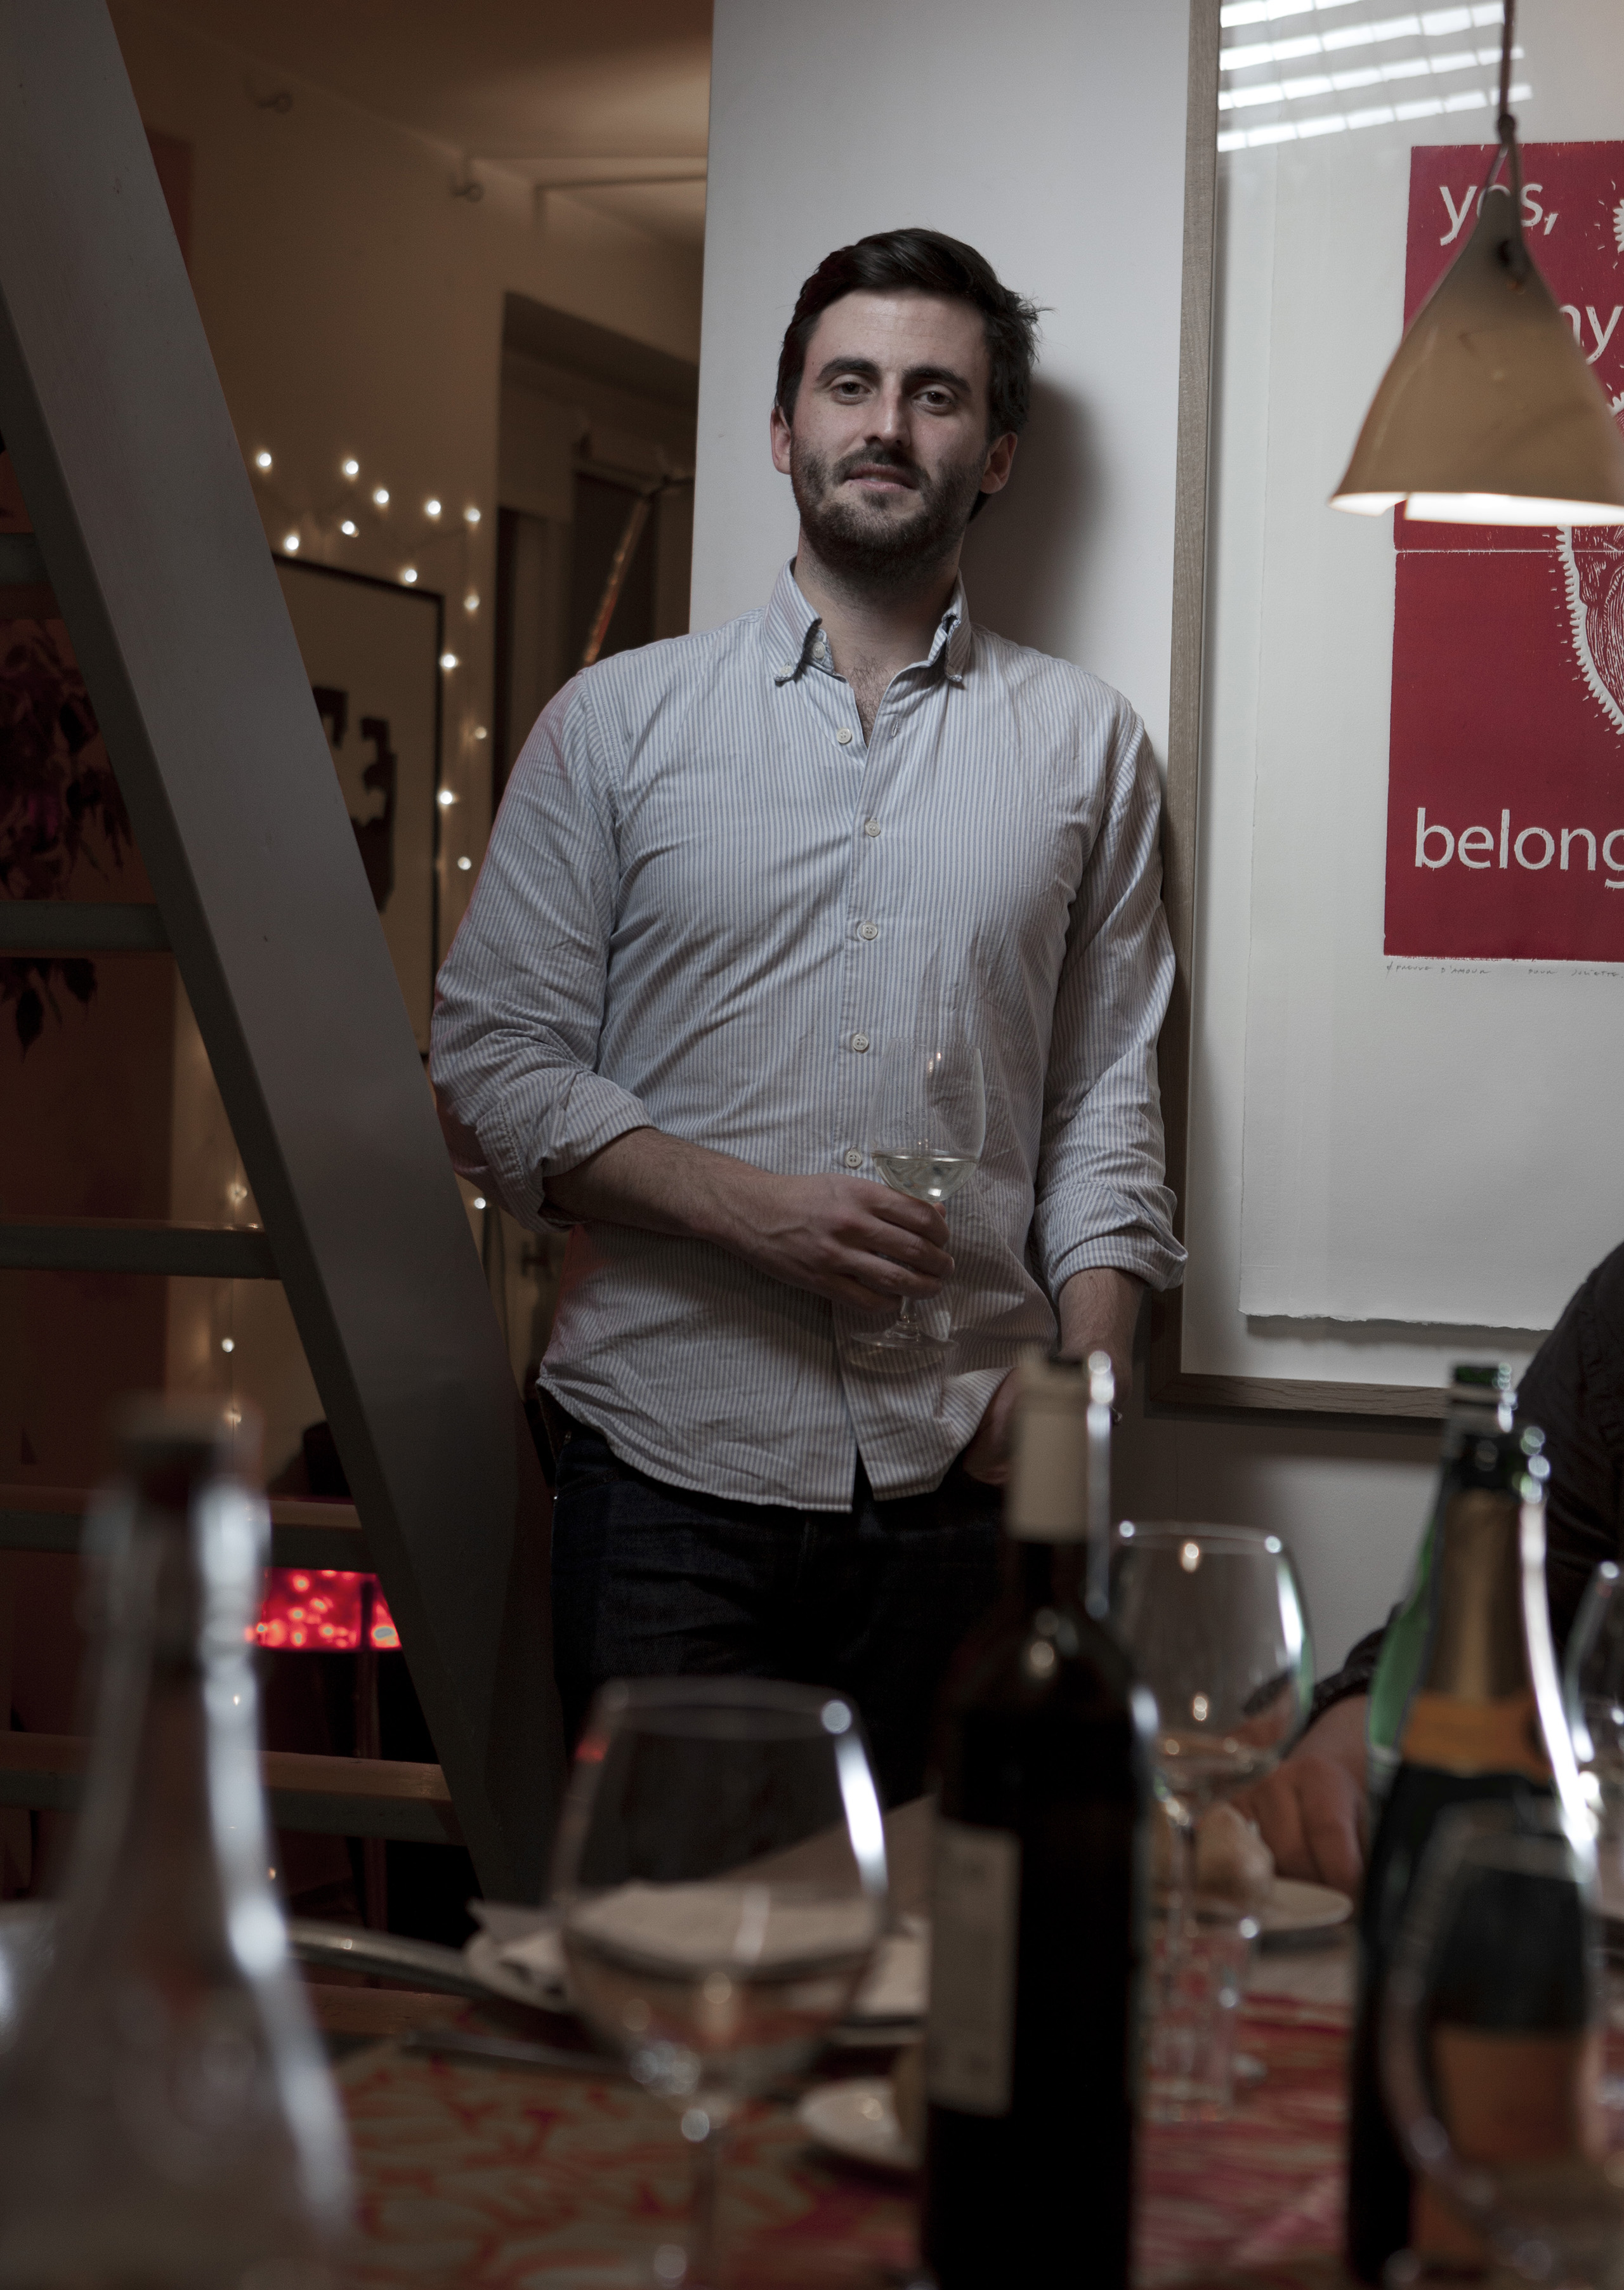 Stephen Leguillon  of La Belle Assiette photographed in a Parisian home while testing out the cuisine of a new chef.